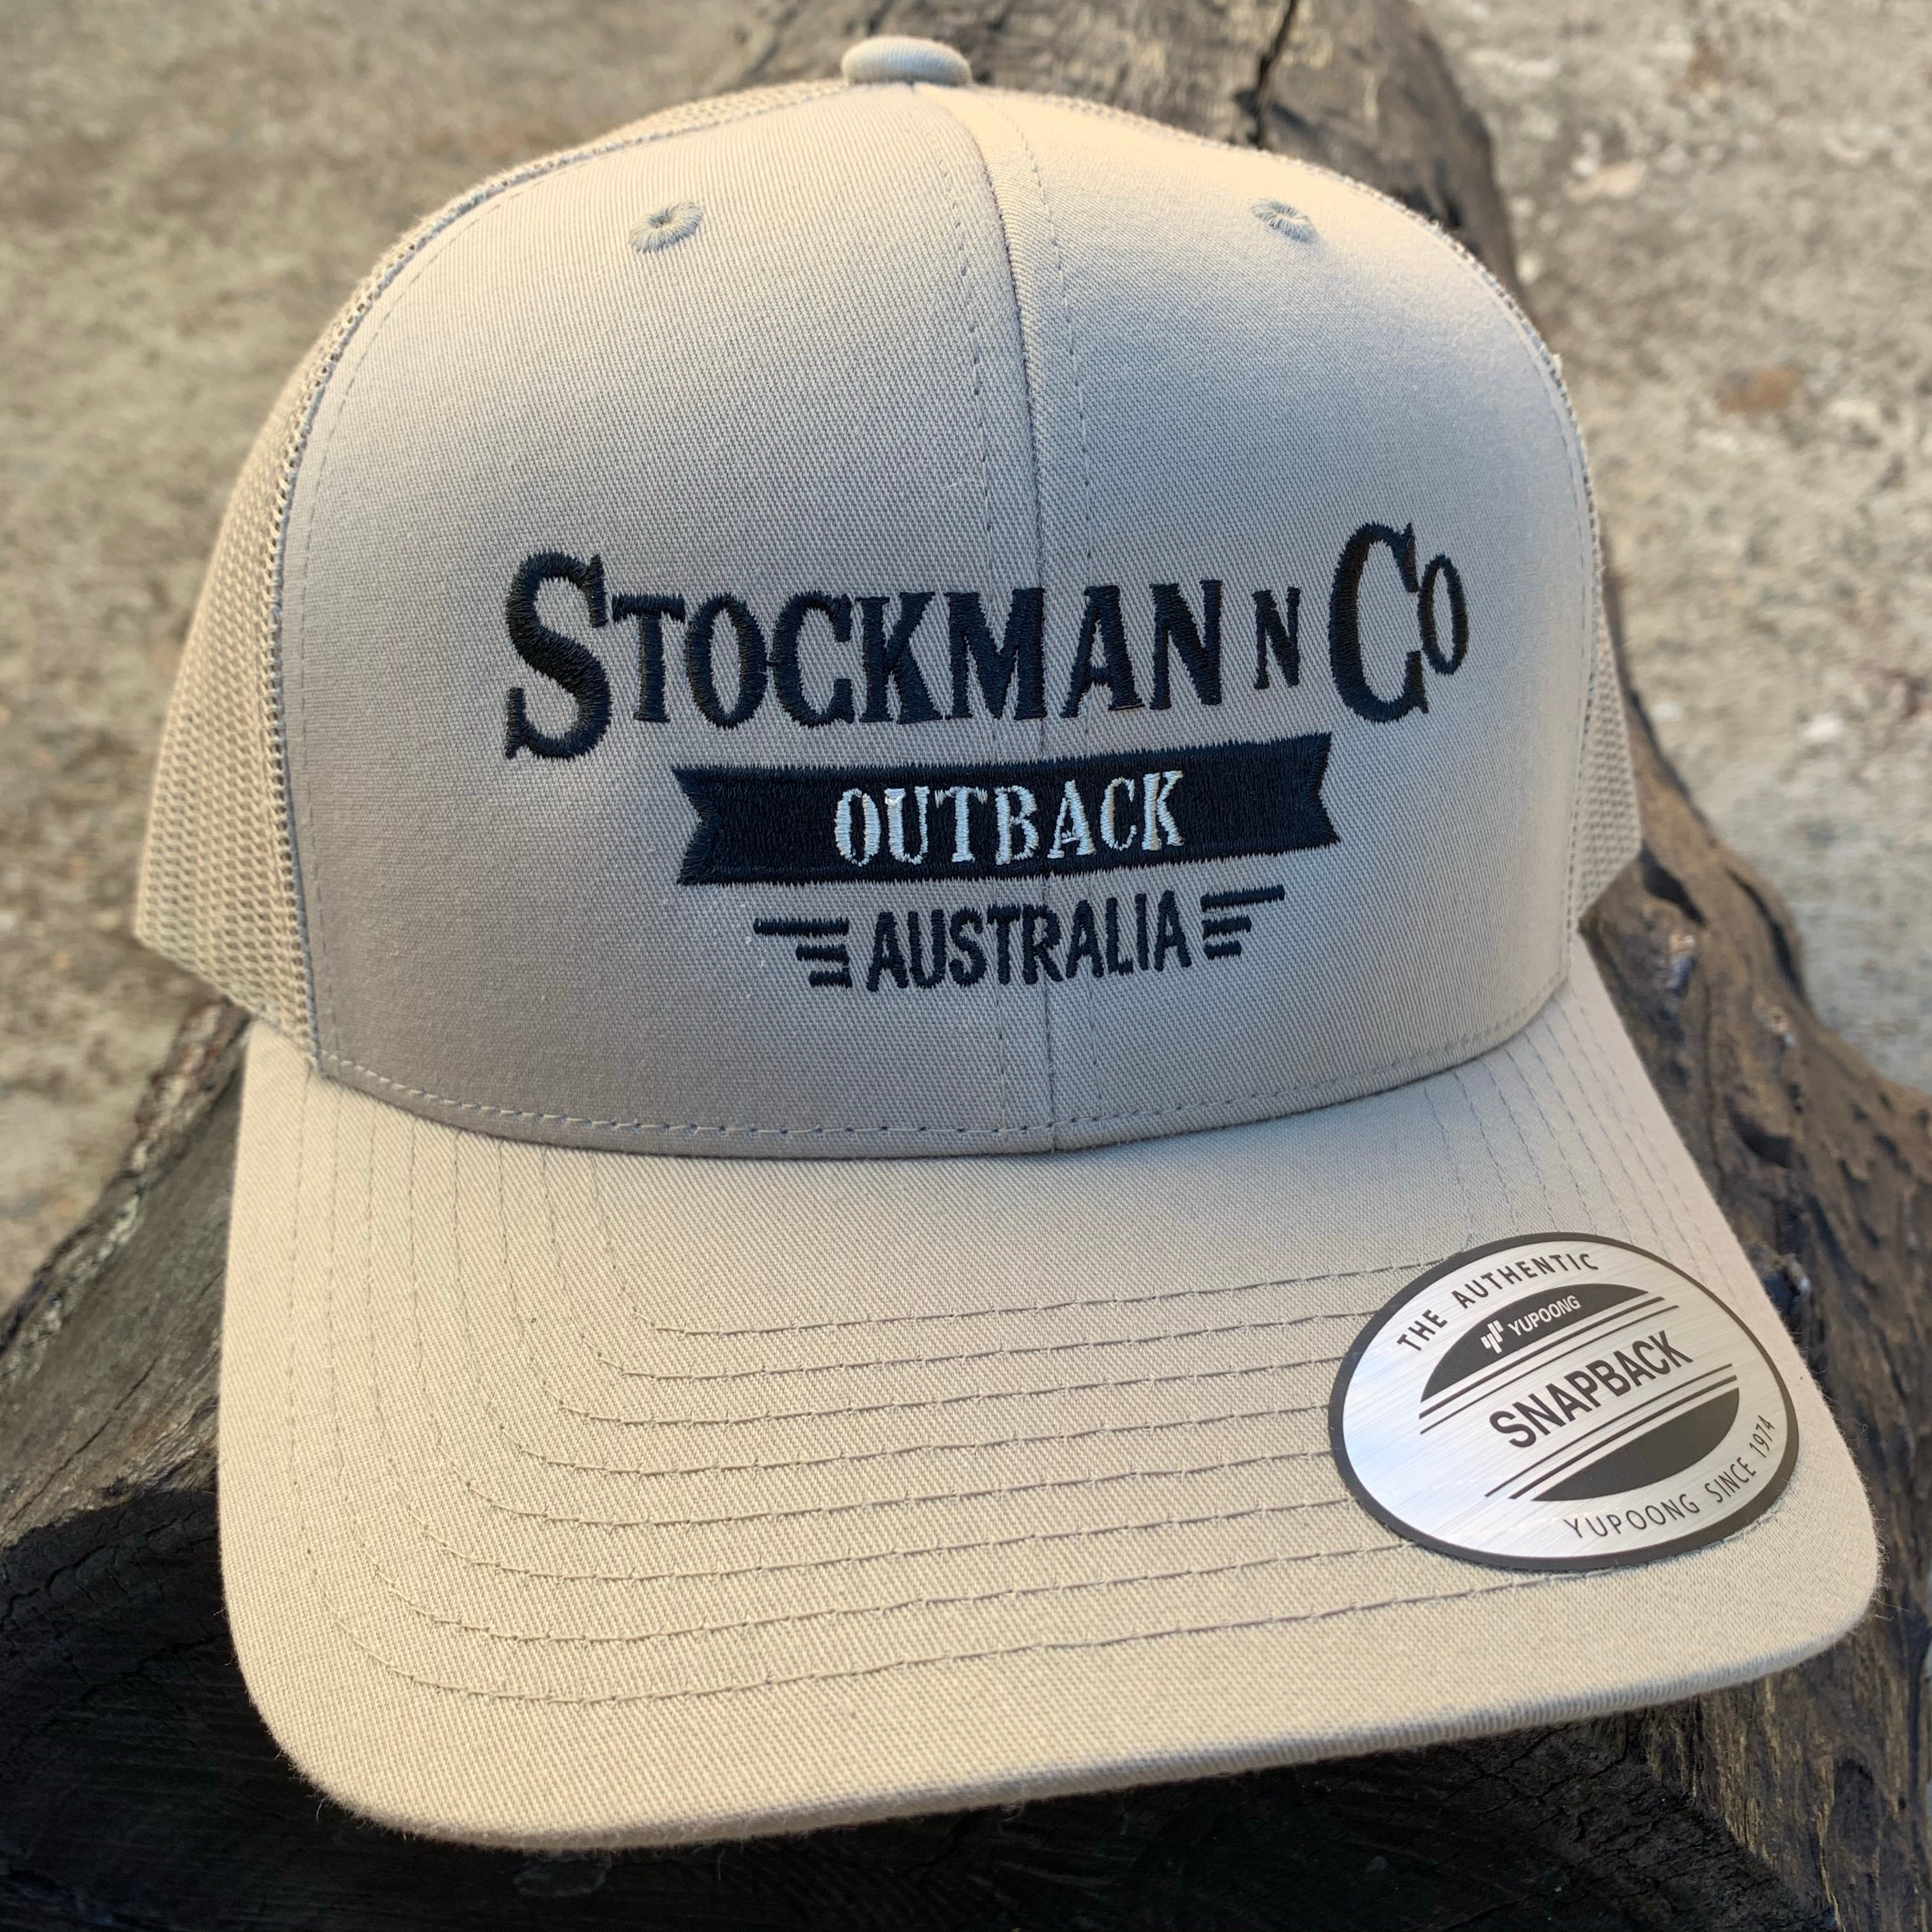 Stockman N Co Outback Trucker - STOCKMAN N CO